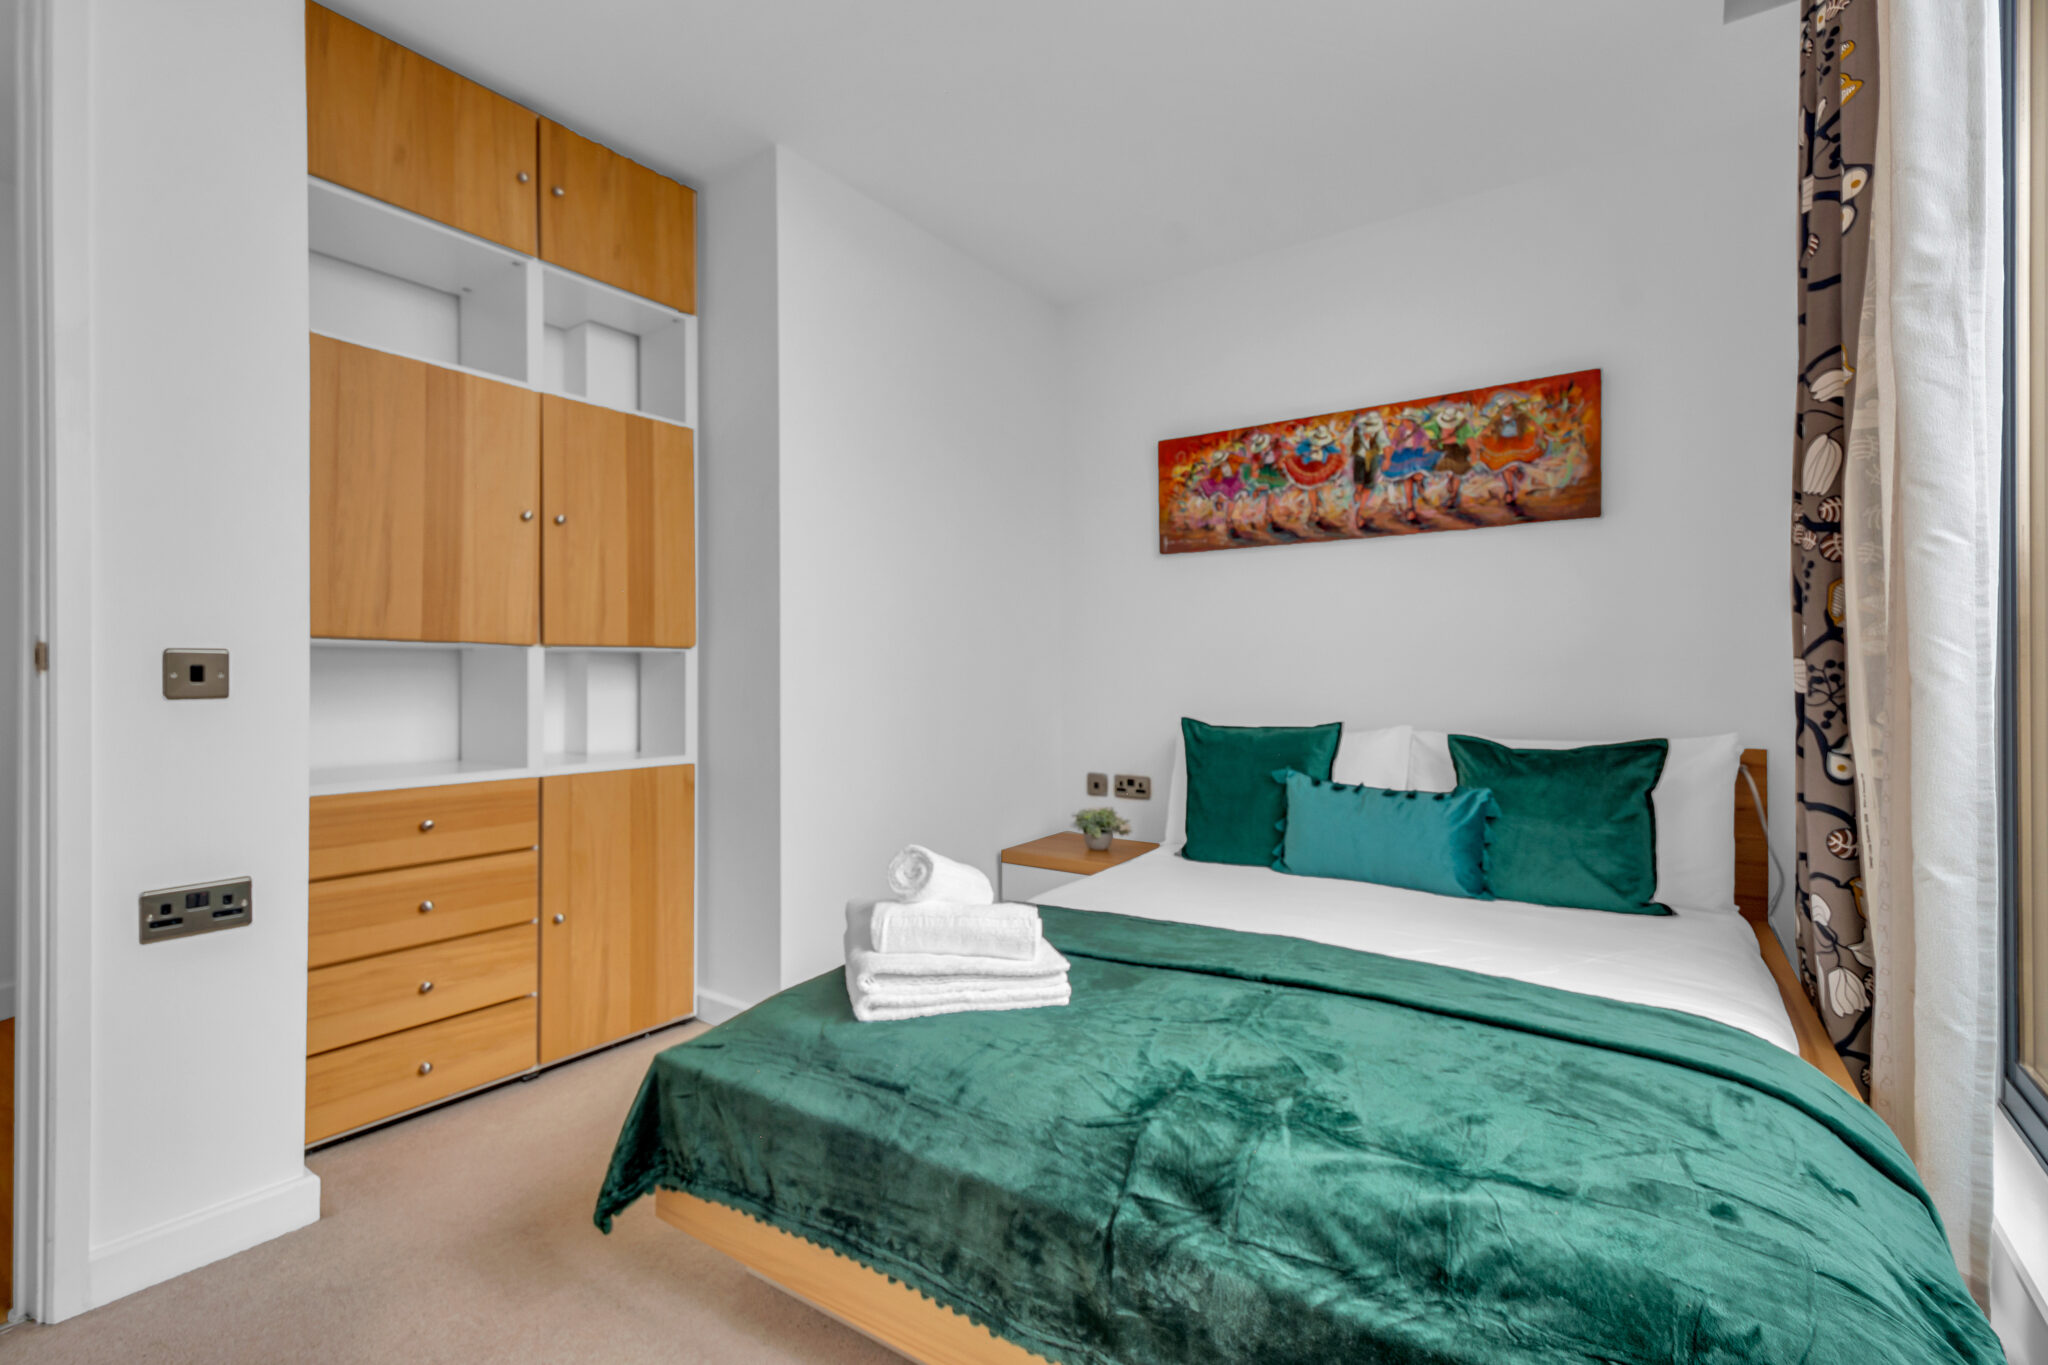 Book-our-Luxury-Accommodation-Near-Regent's-Park-and-stay-in-one-of-London's-Most-Desirable-Area!-Camden,-Euston-and-Kings-Cross-are-close-by-|-Urban-Stay